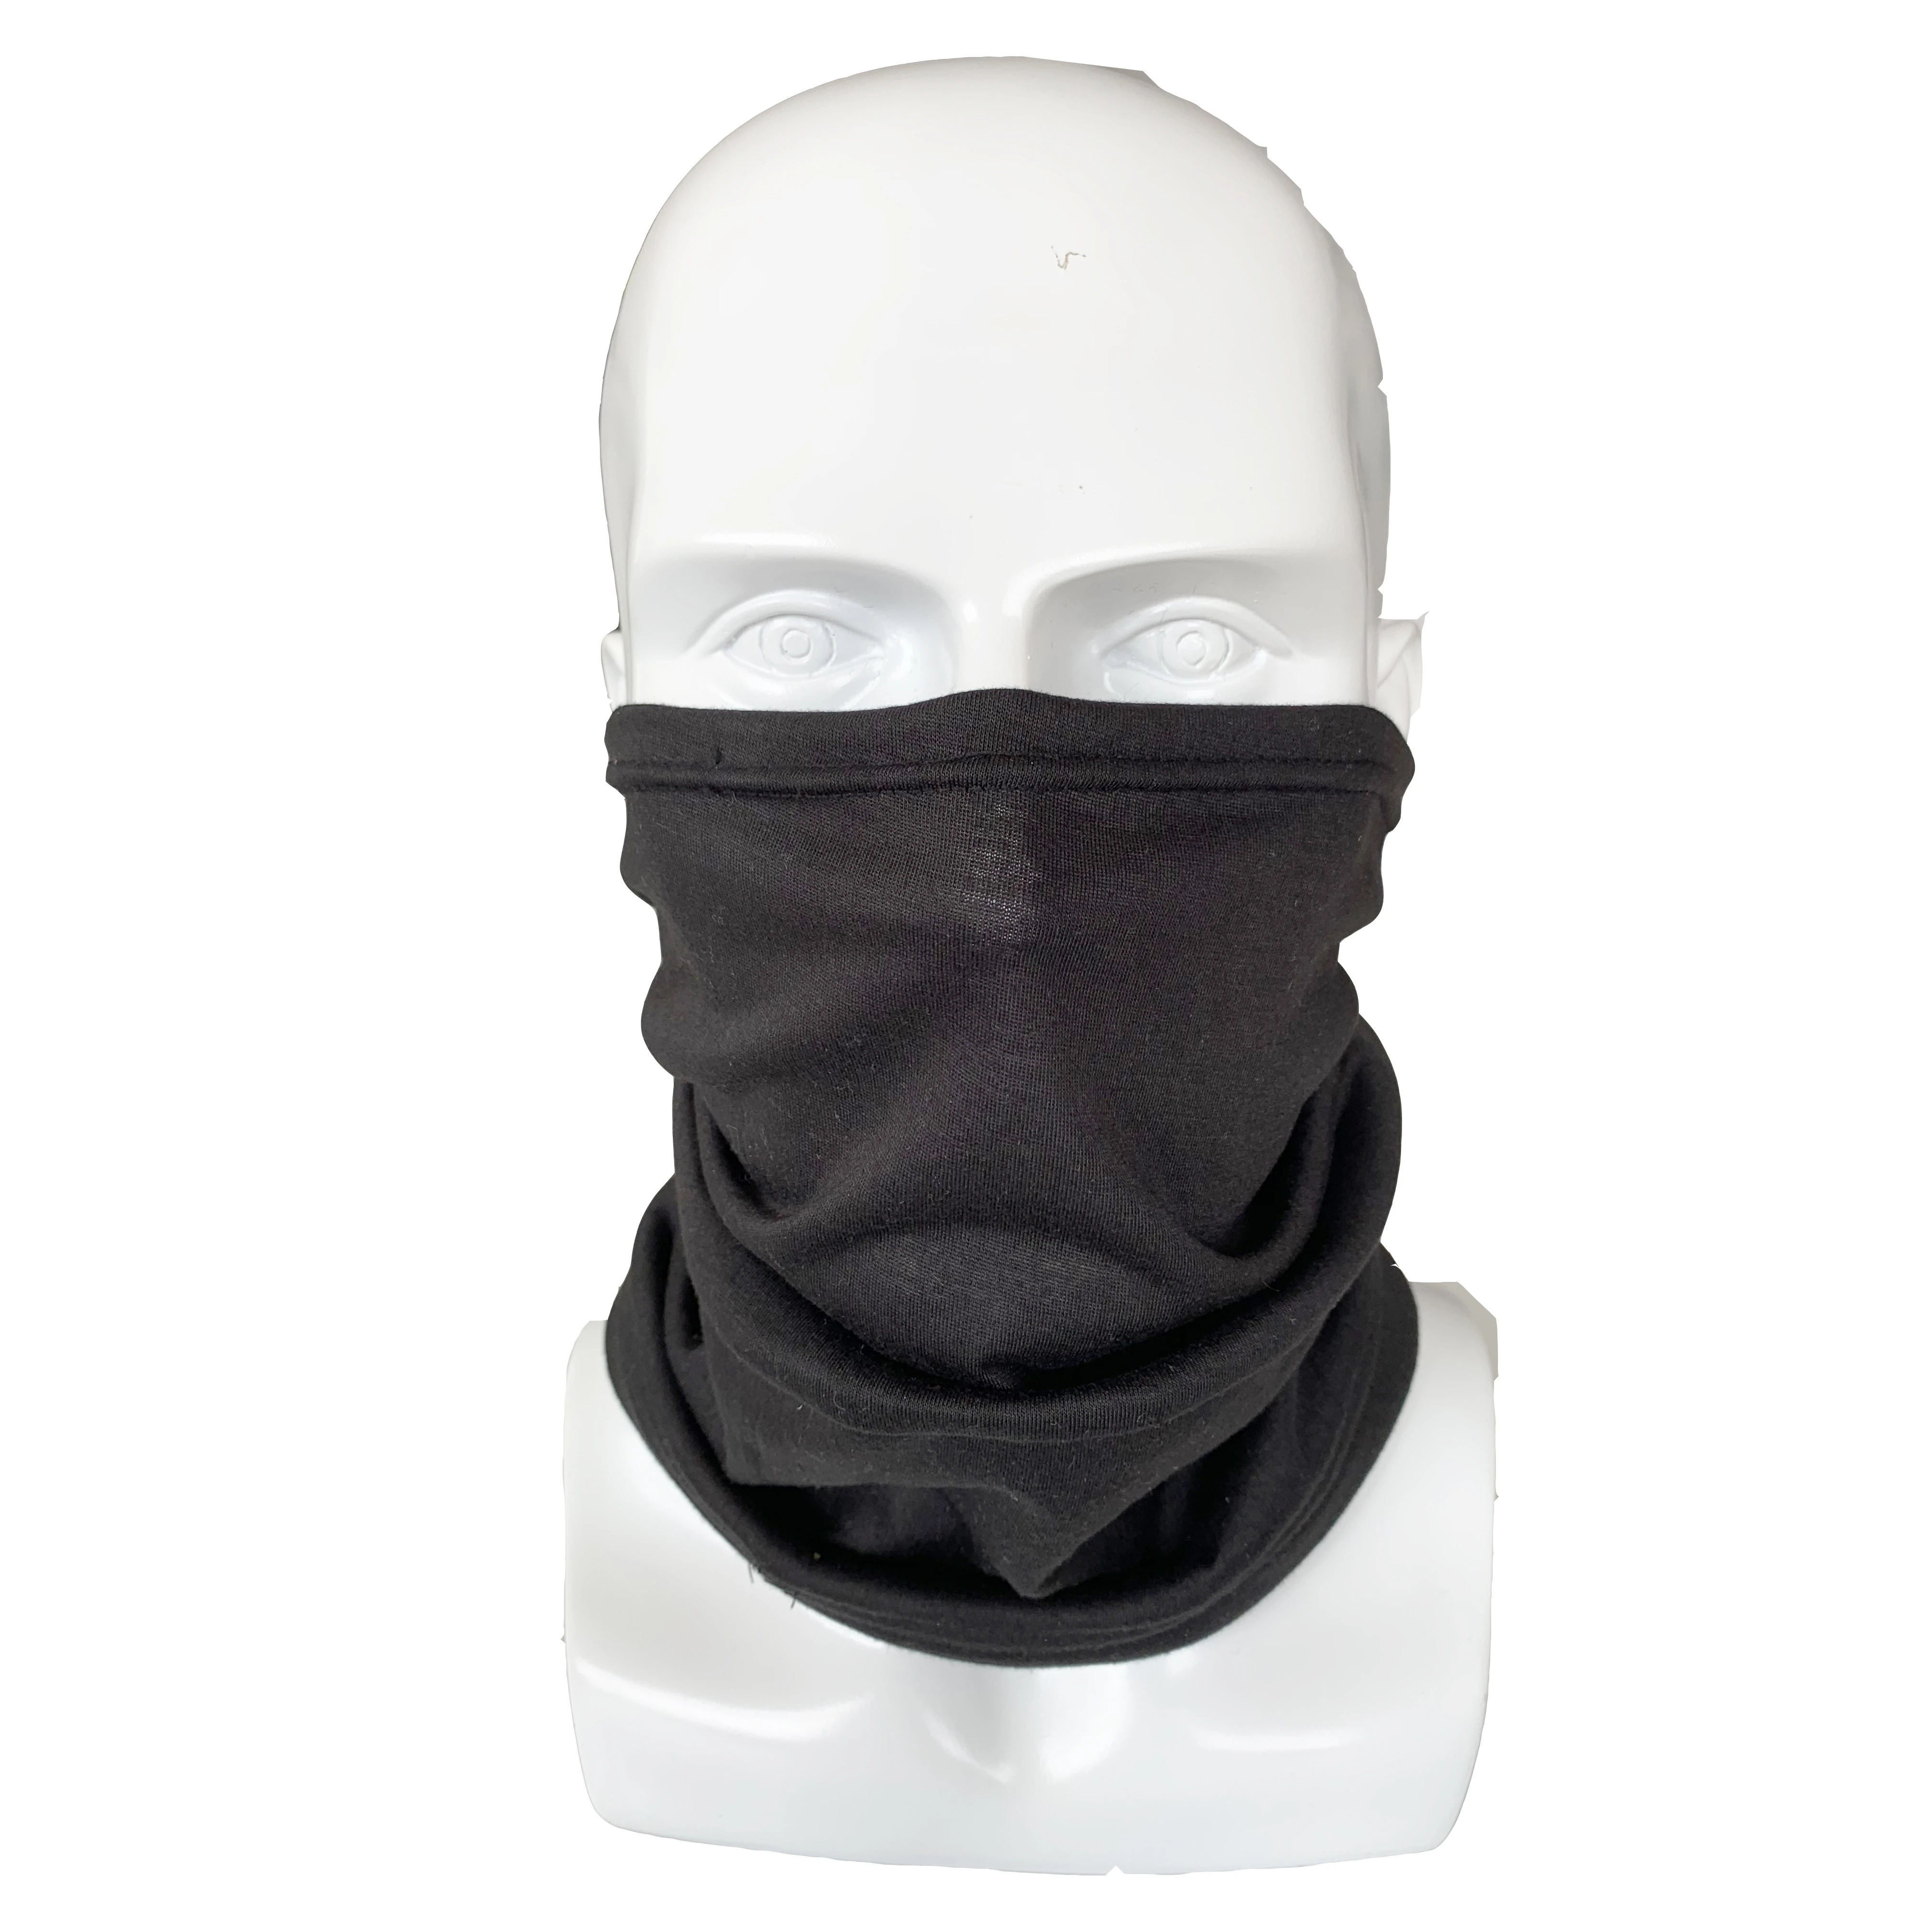 Fire proof Neck Tube Guard Fire Flame retardant Neck Gaiter FR protection Snood Bandana Sleeve Welder Military Army Police